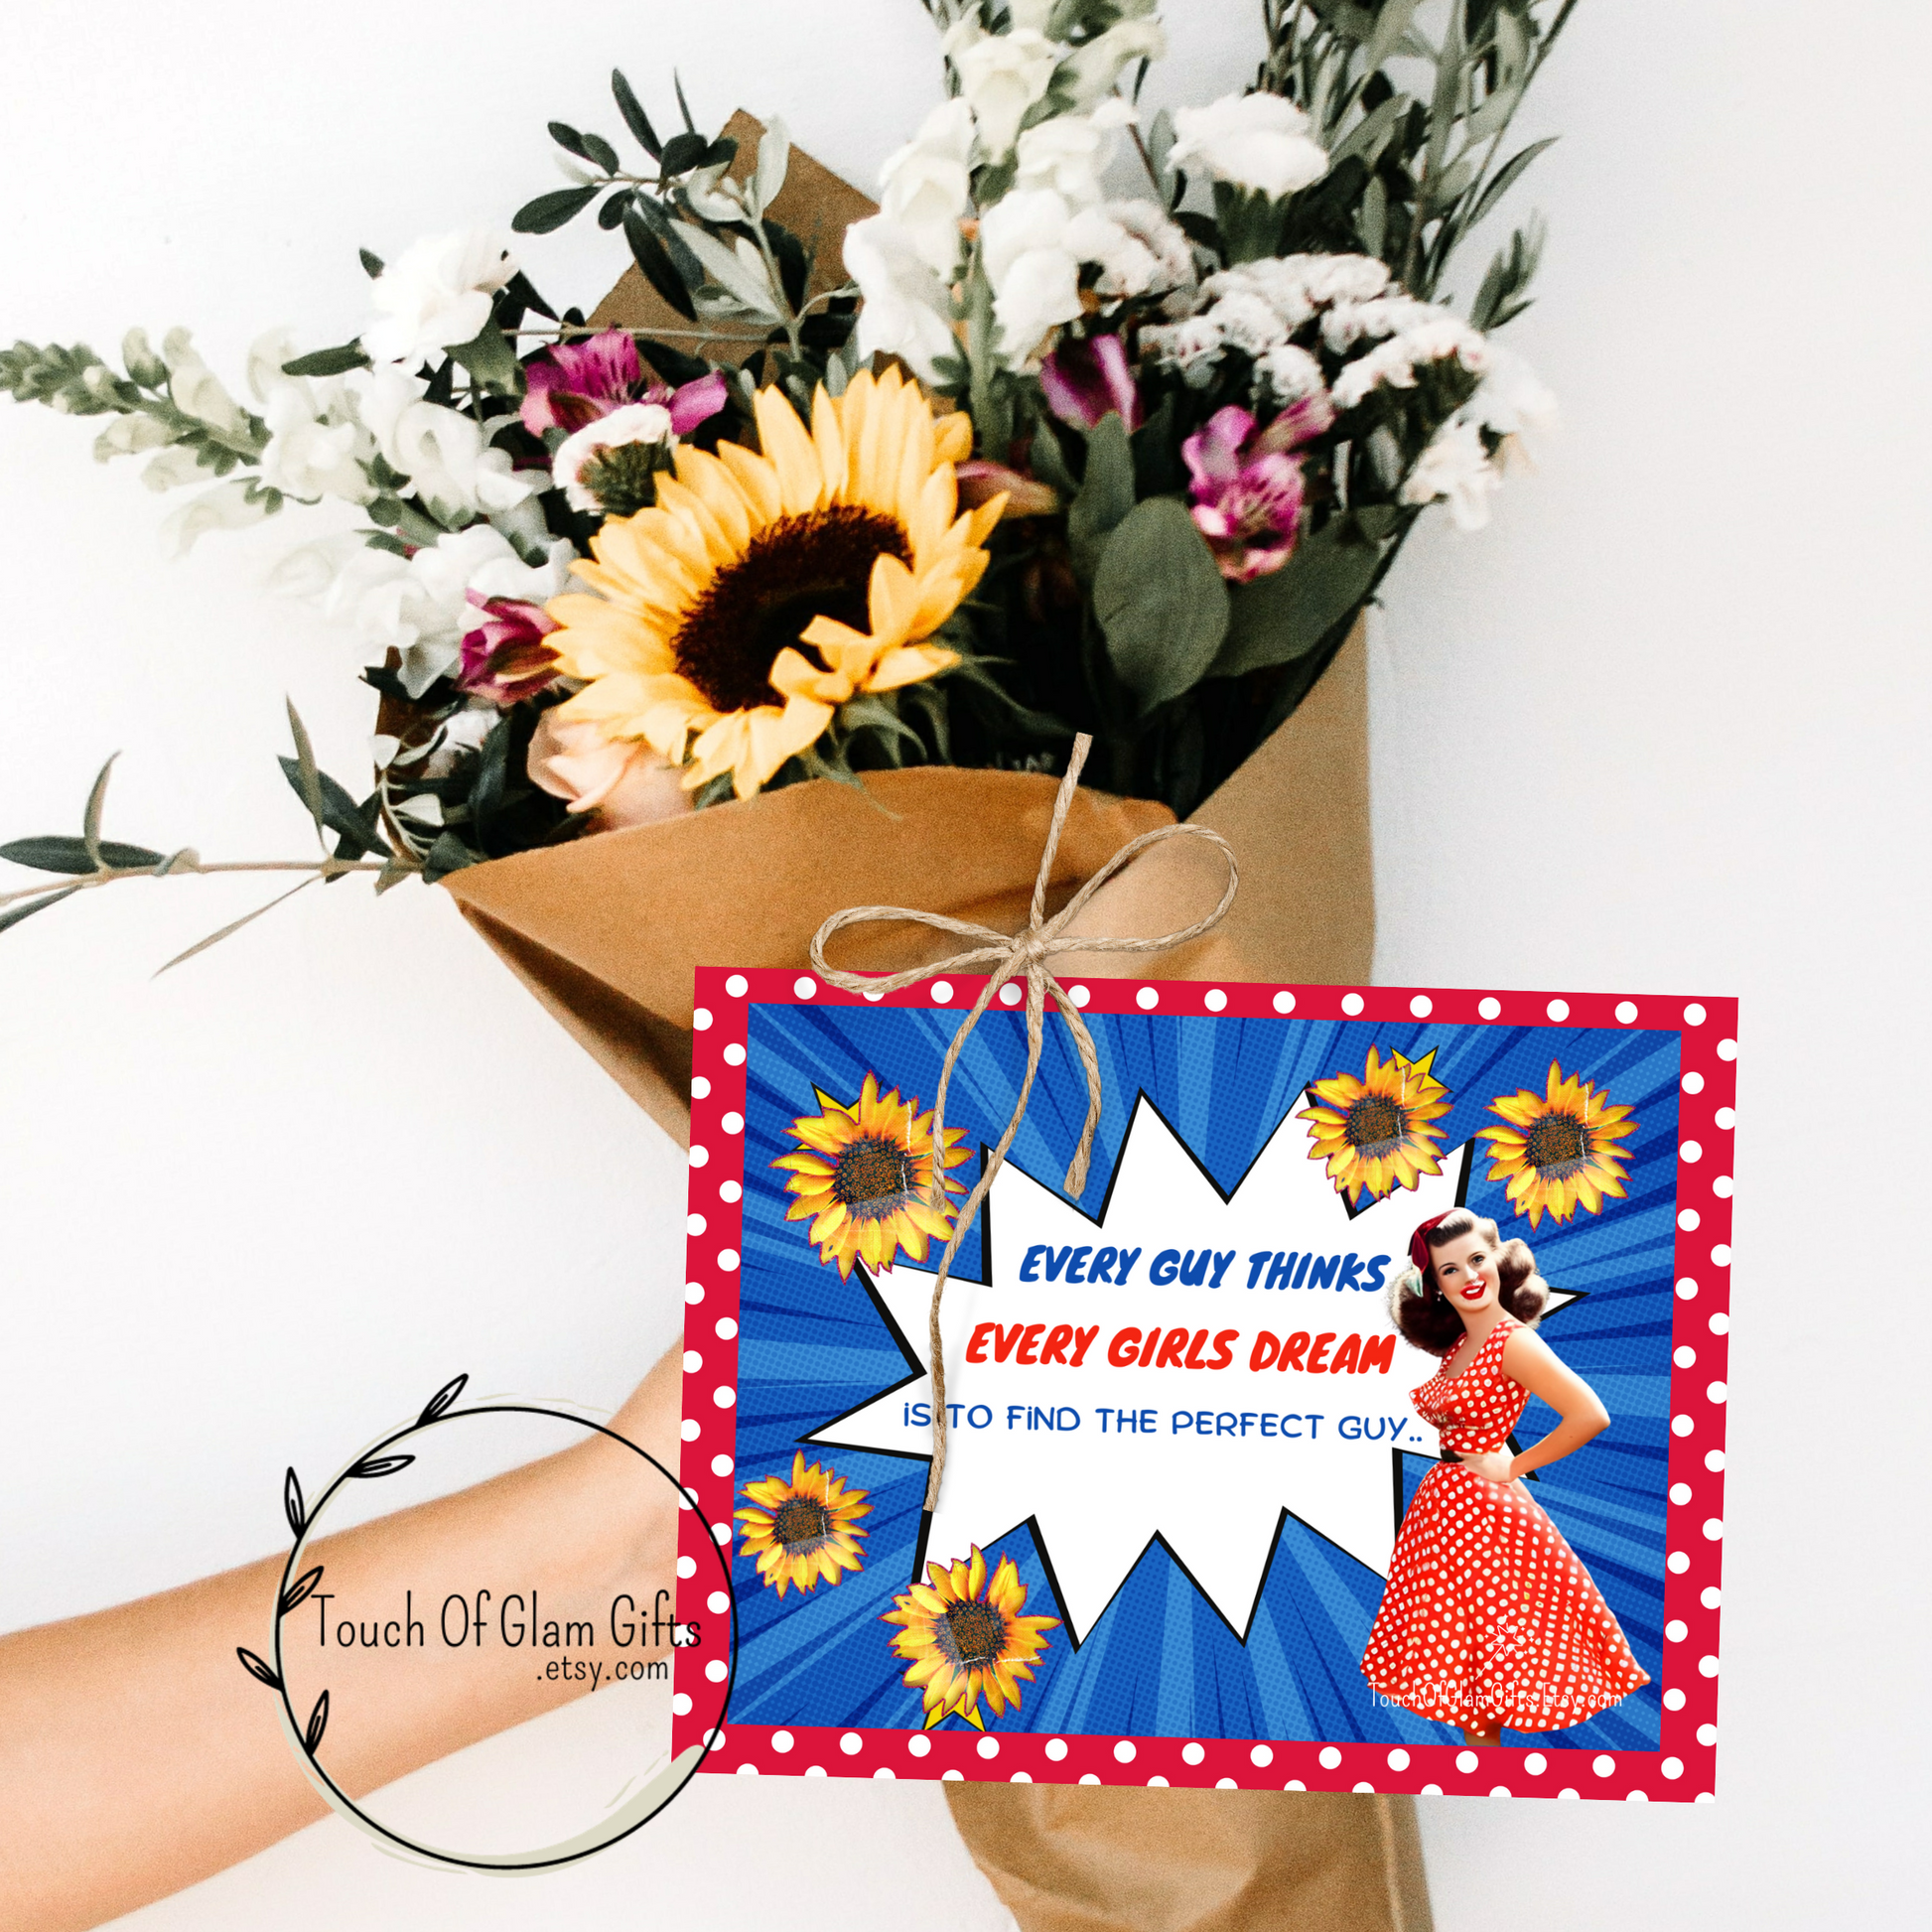 Give a bouquet of flowers and download and print our funny birthday card for your female friend.